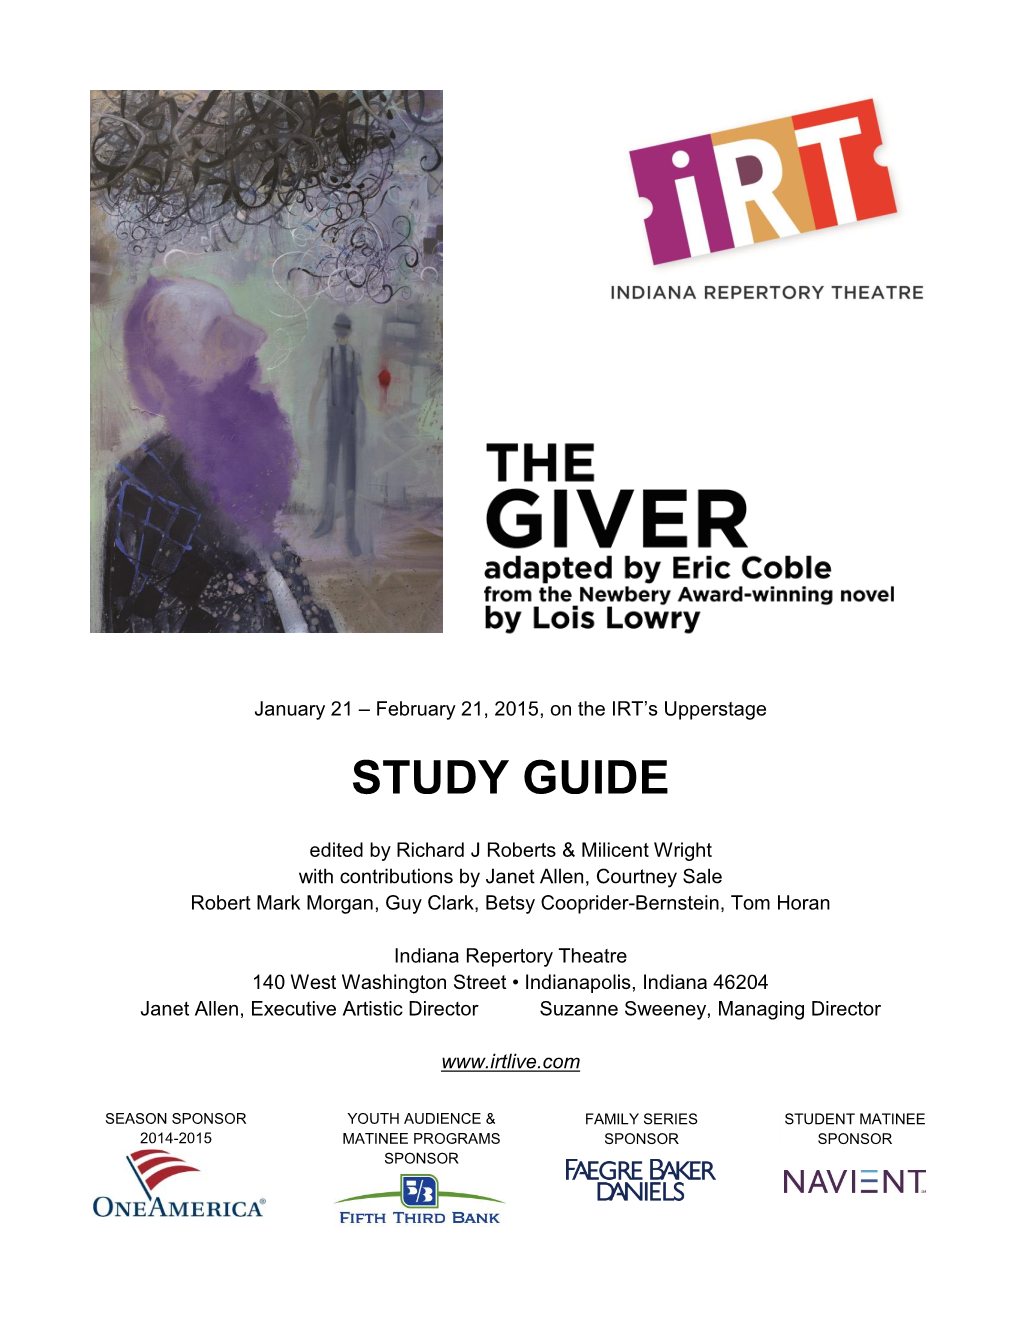 IRT Study Guide for the Giver.Pdf